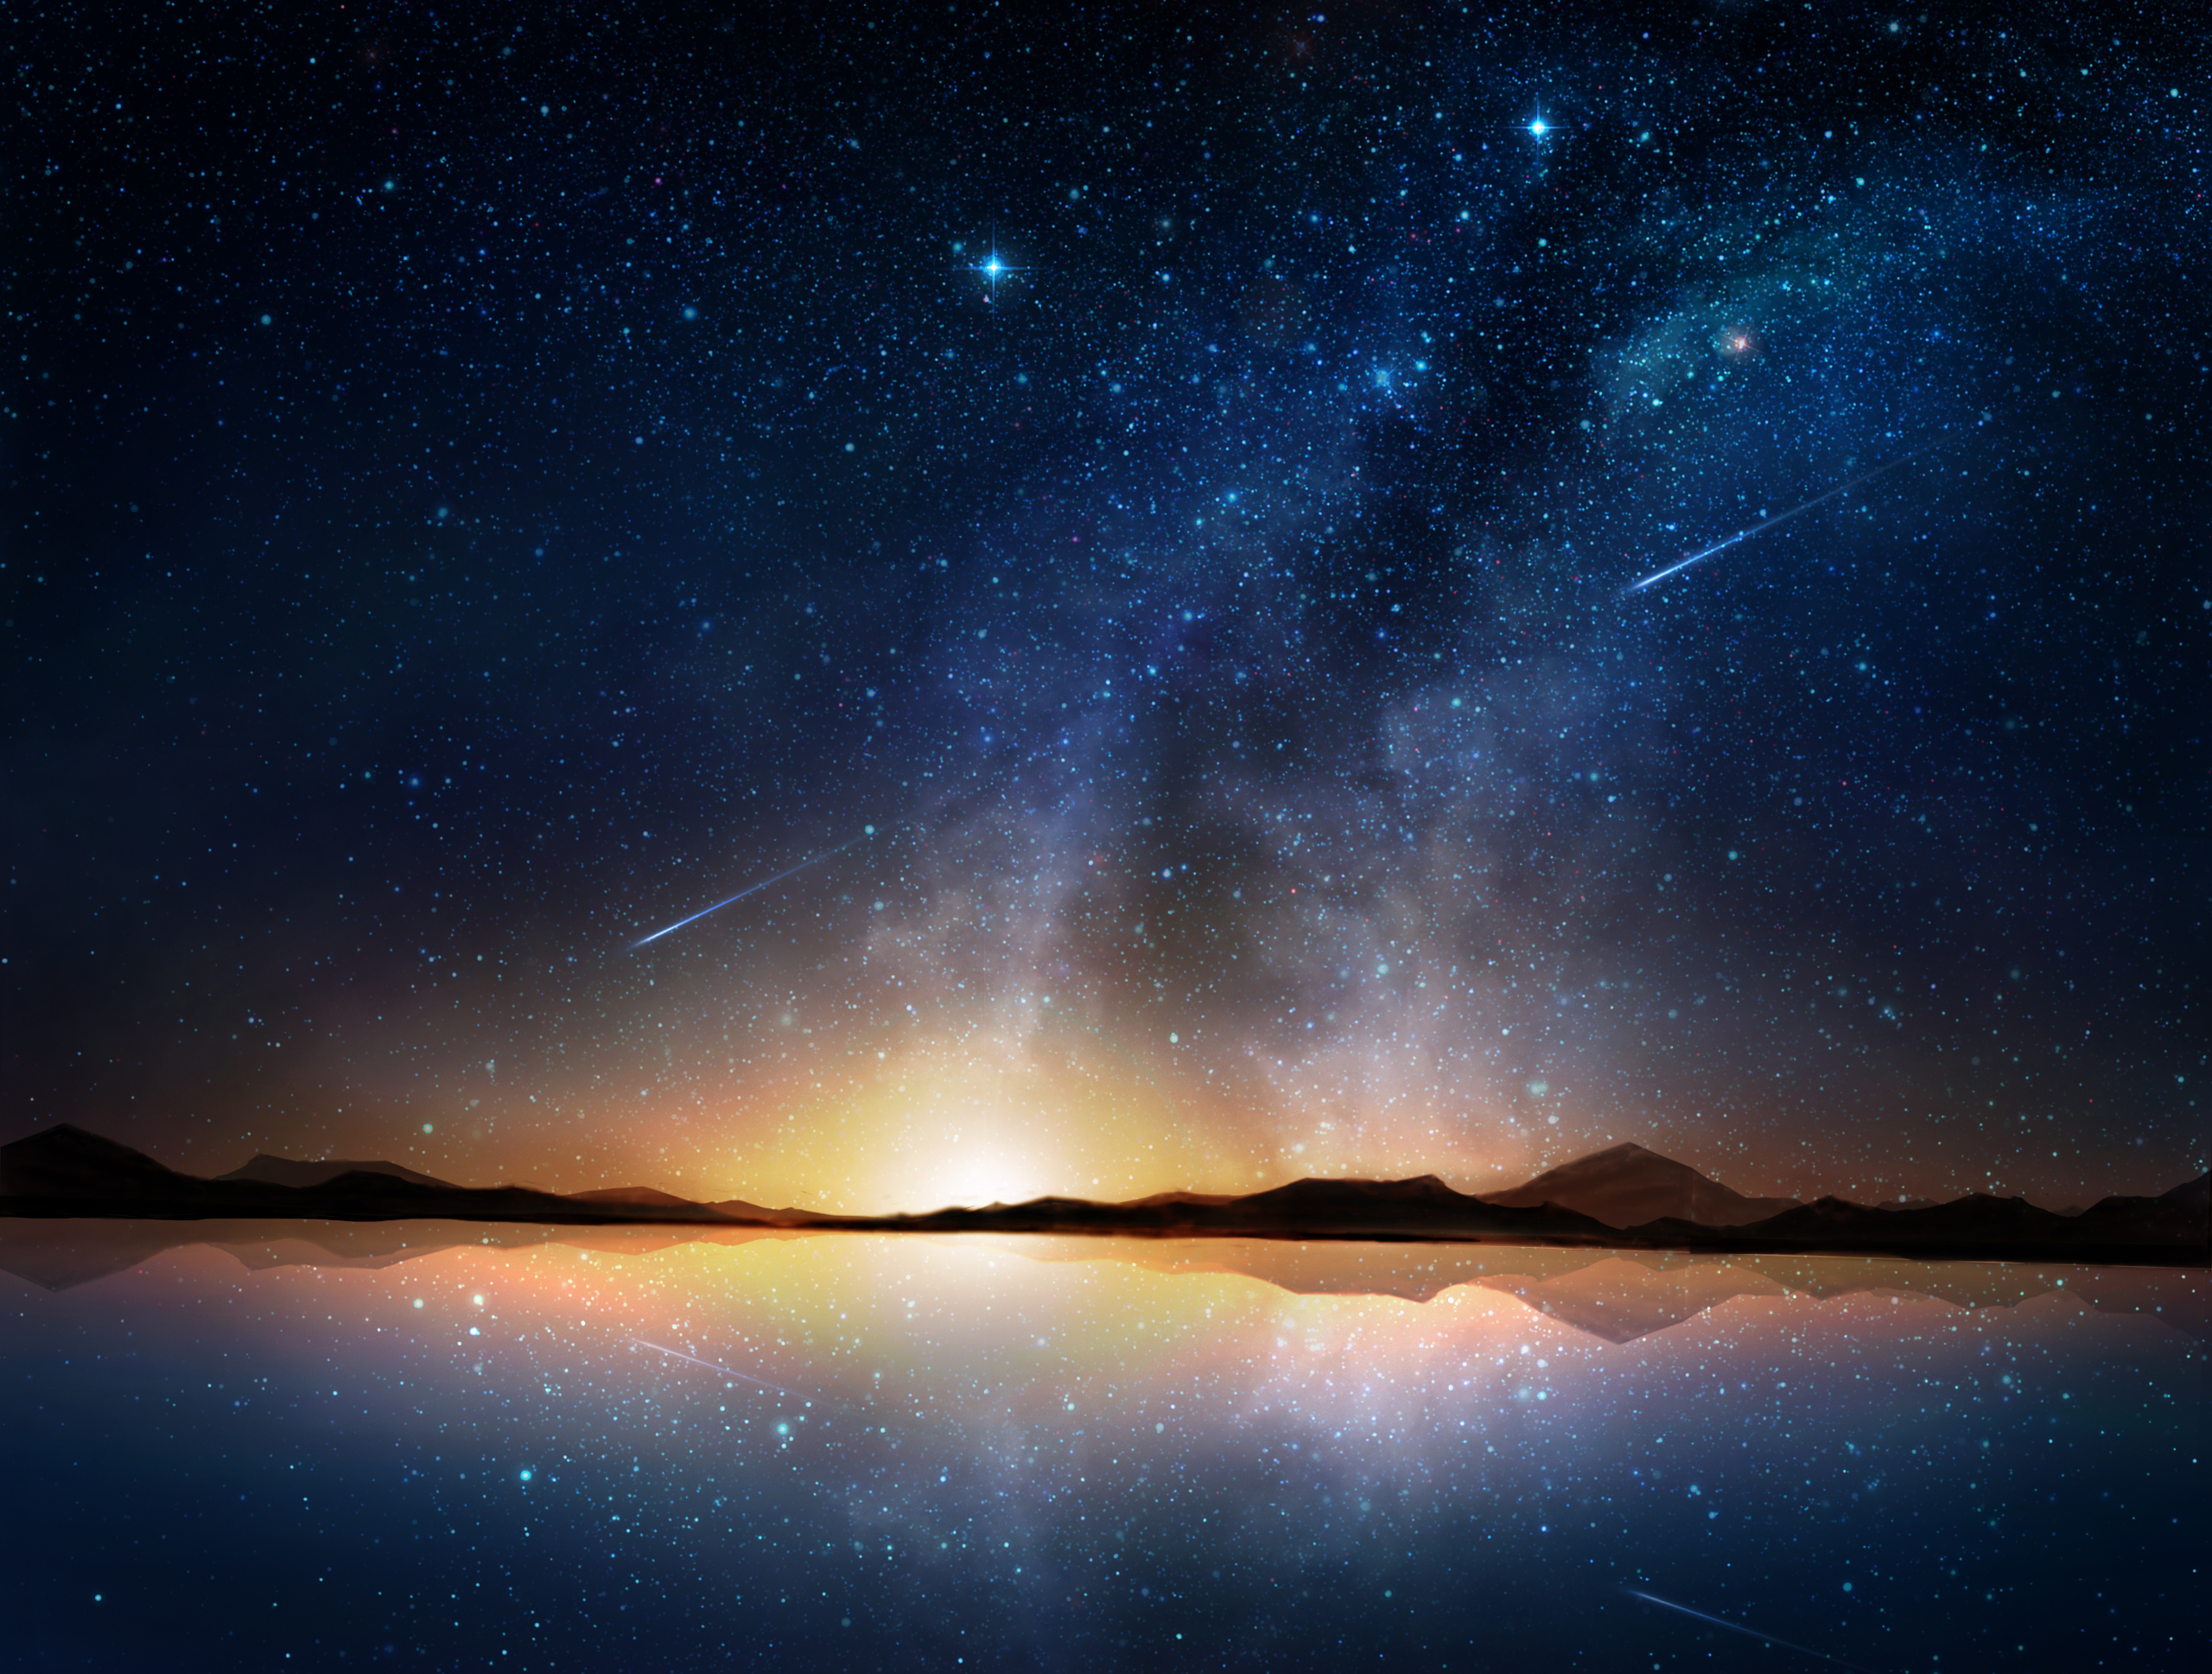 Reflection Shooting Star Starry Sky 2560x1937